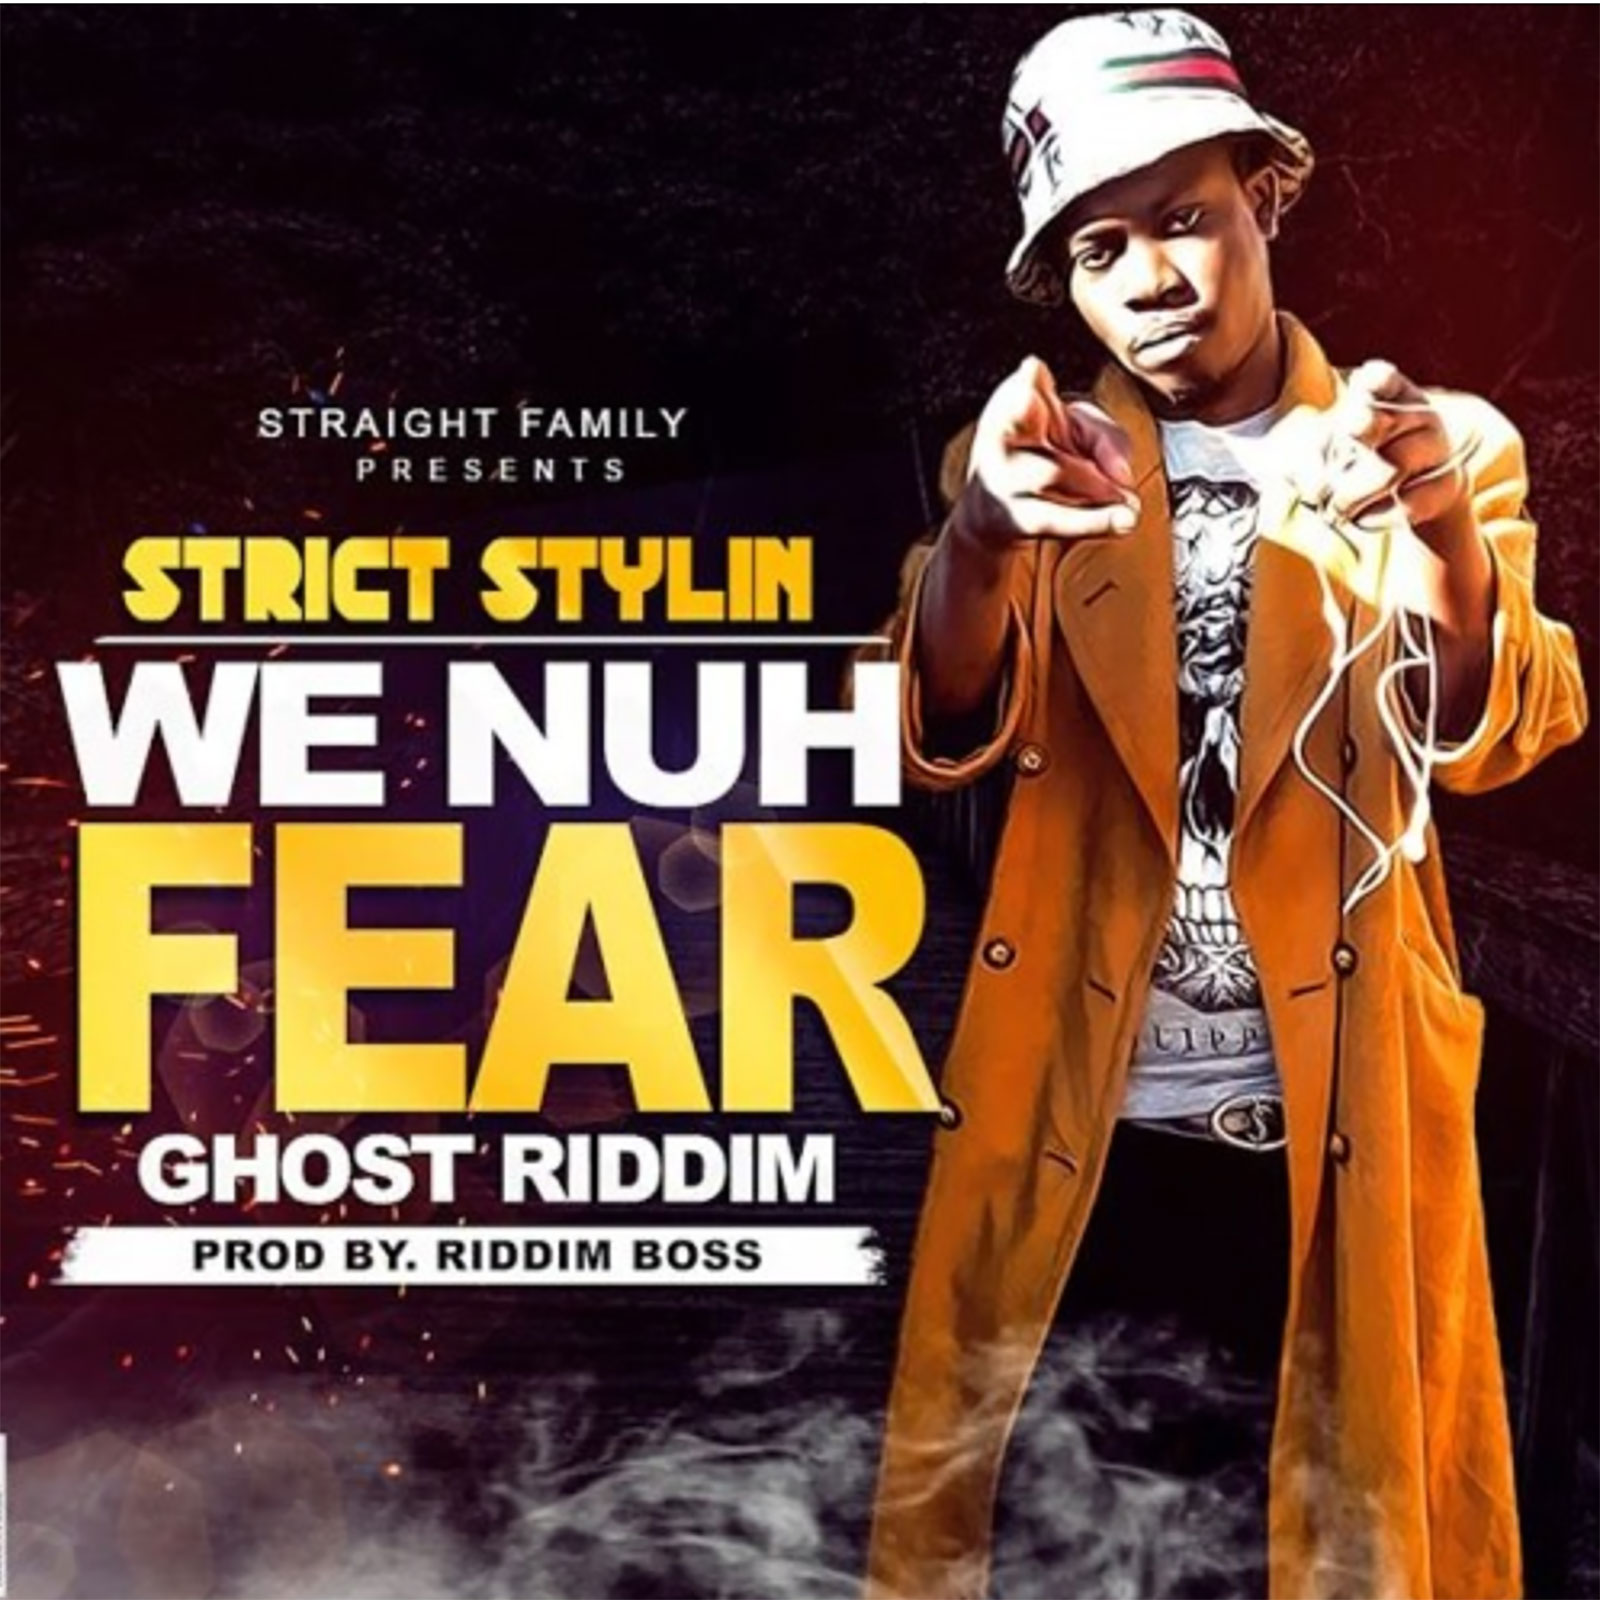 We Nuh Fear by Strict Stylin